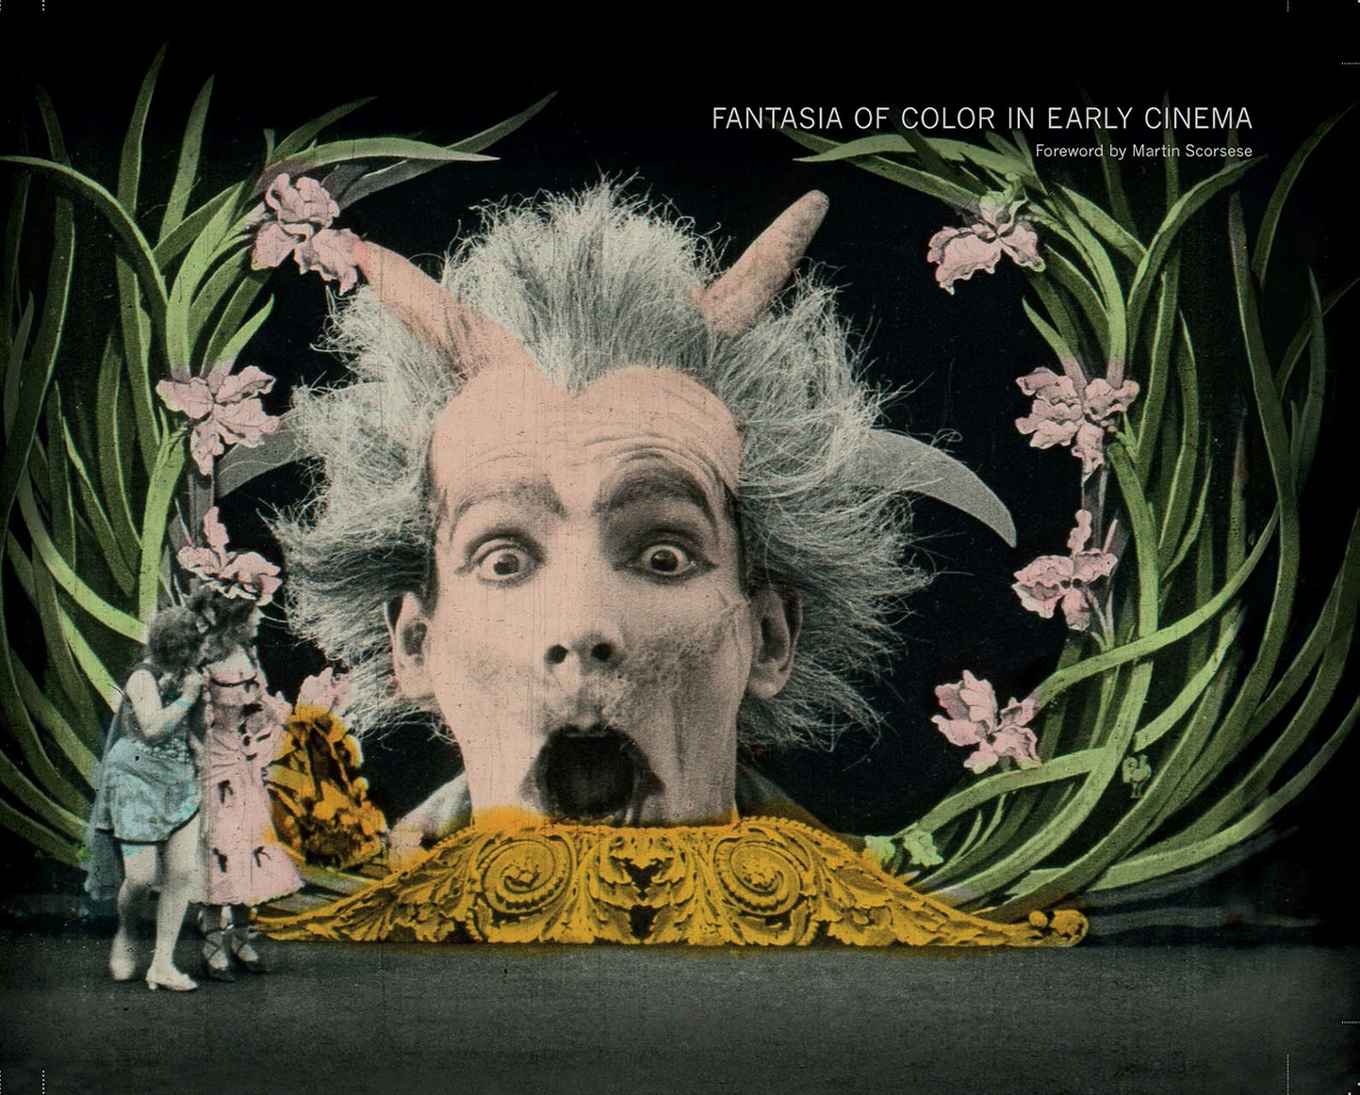 Fantasia of Color in Early Cinema